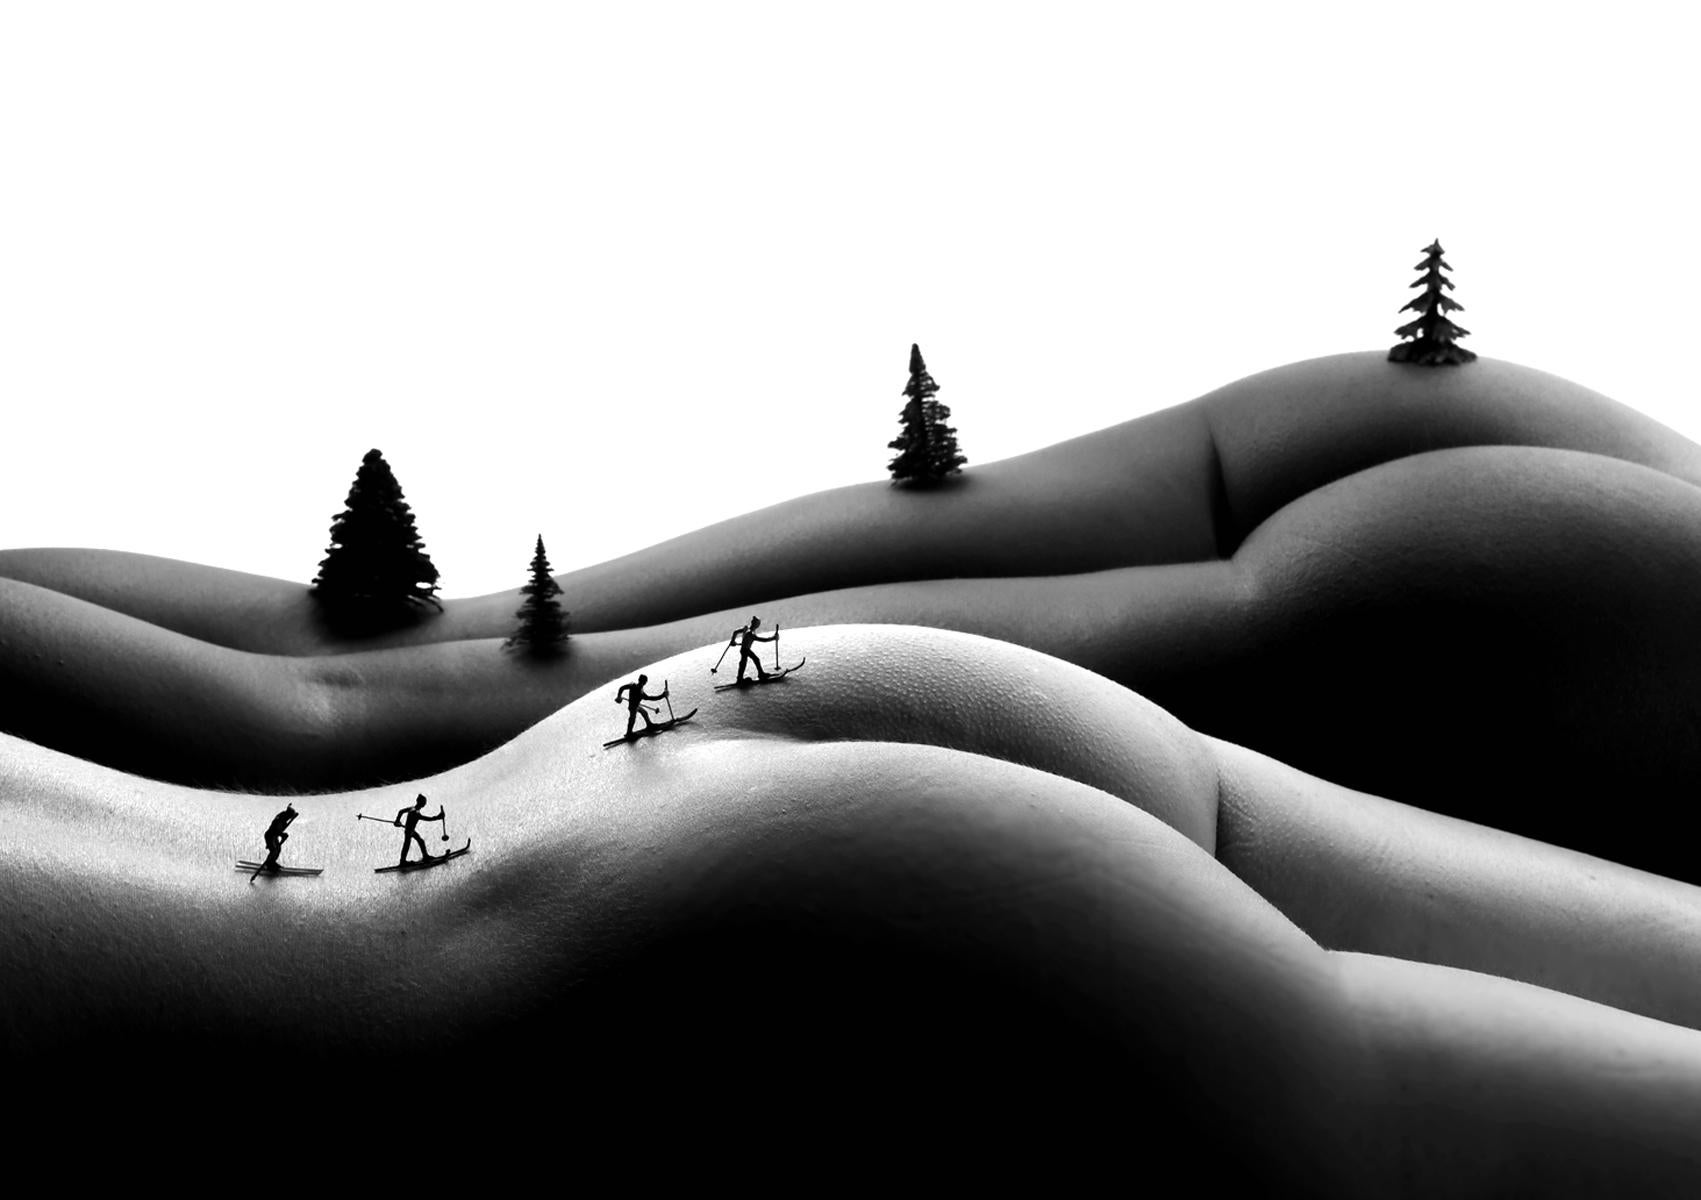 Cross country skiers  - black and white photography - Photograph by Allan I. Teger